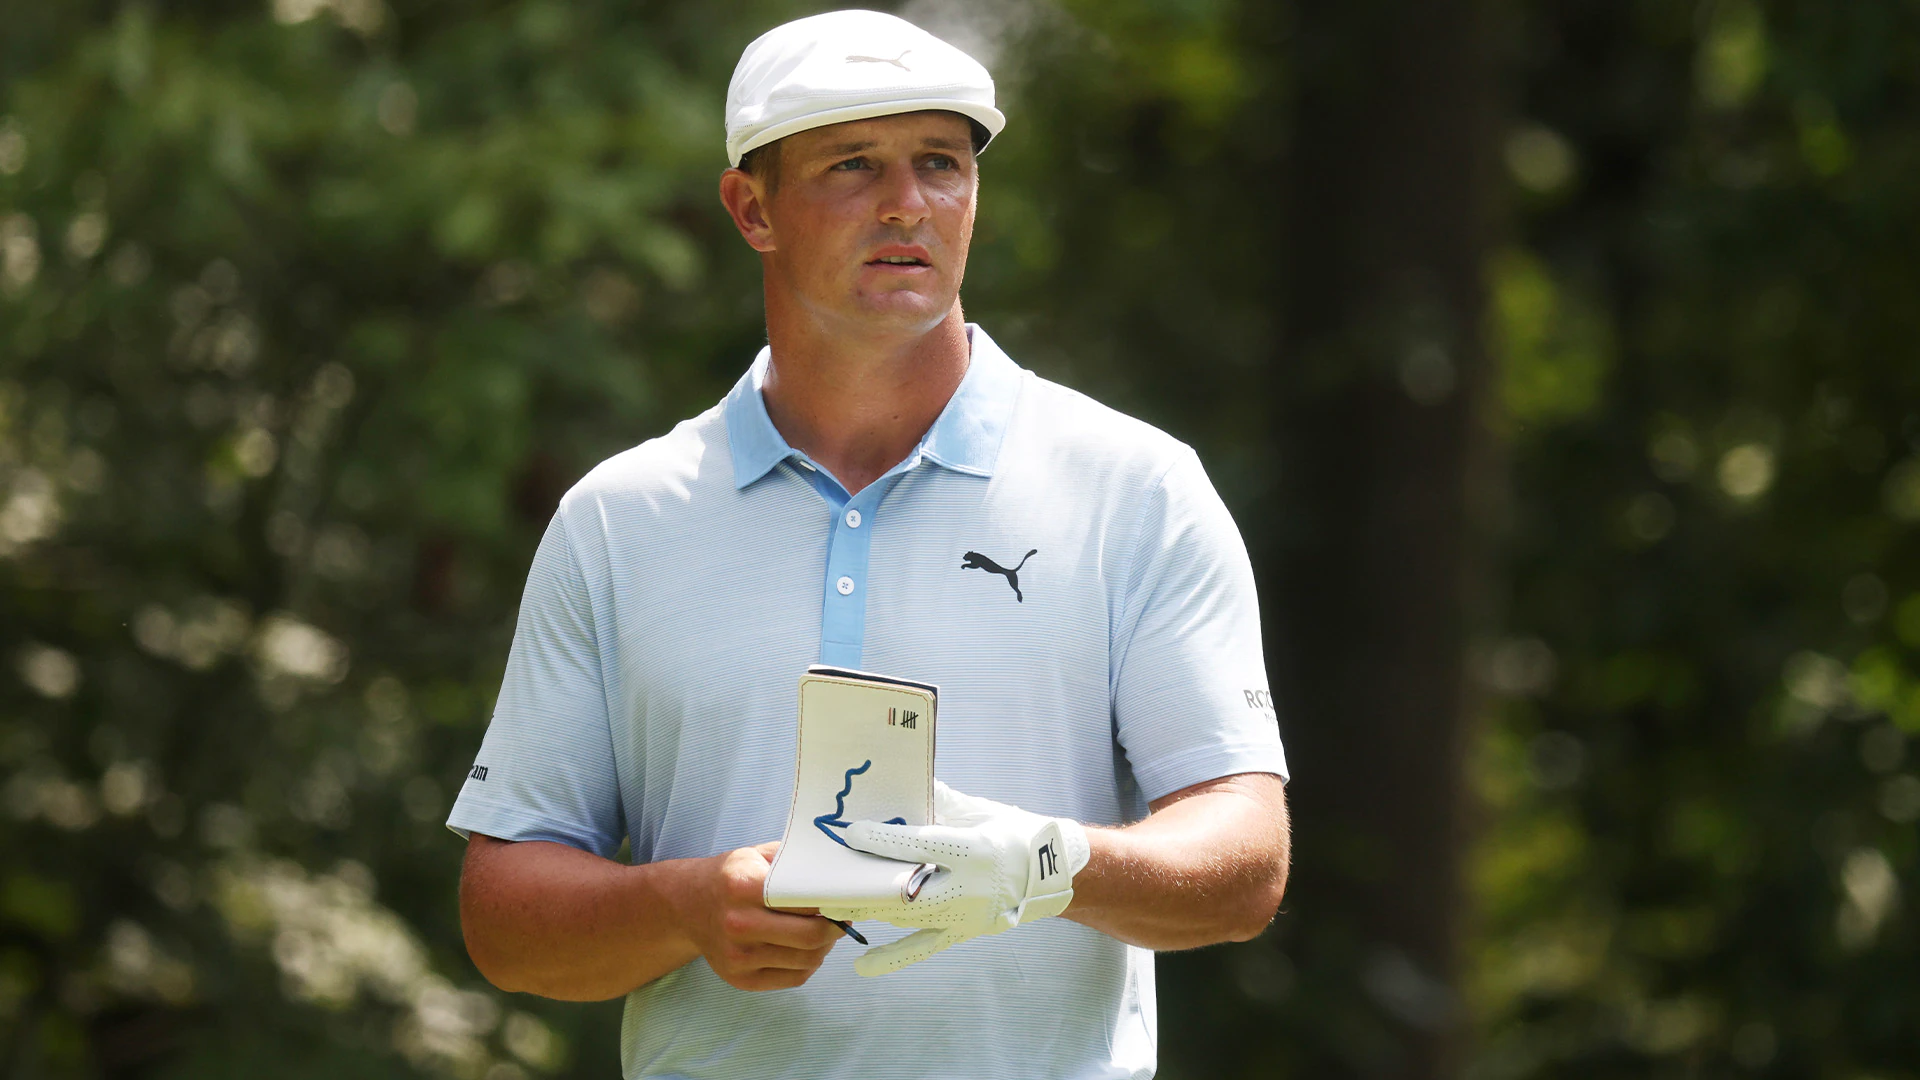 Bryson DeChambeau records back-to-back eagles, water shots; tied for BMW lead